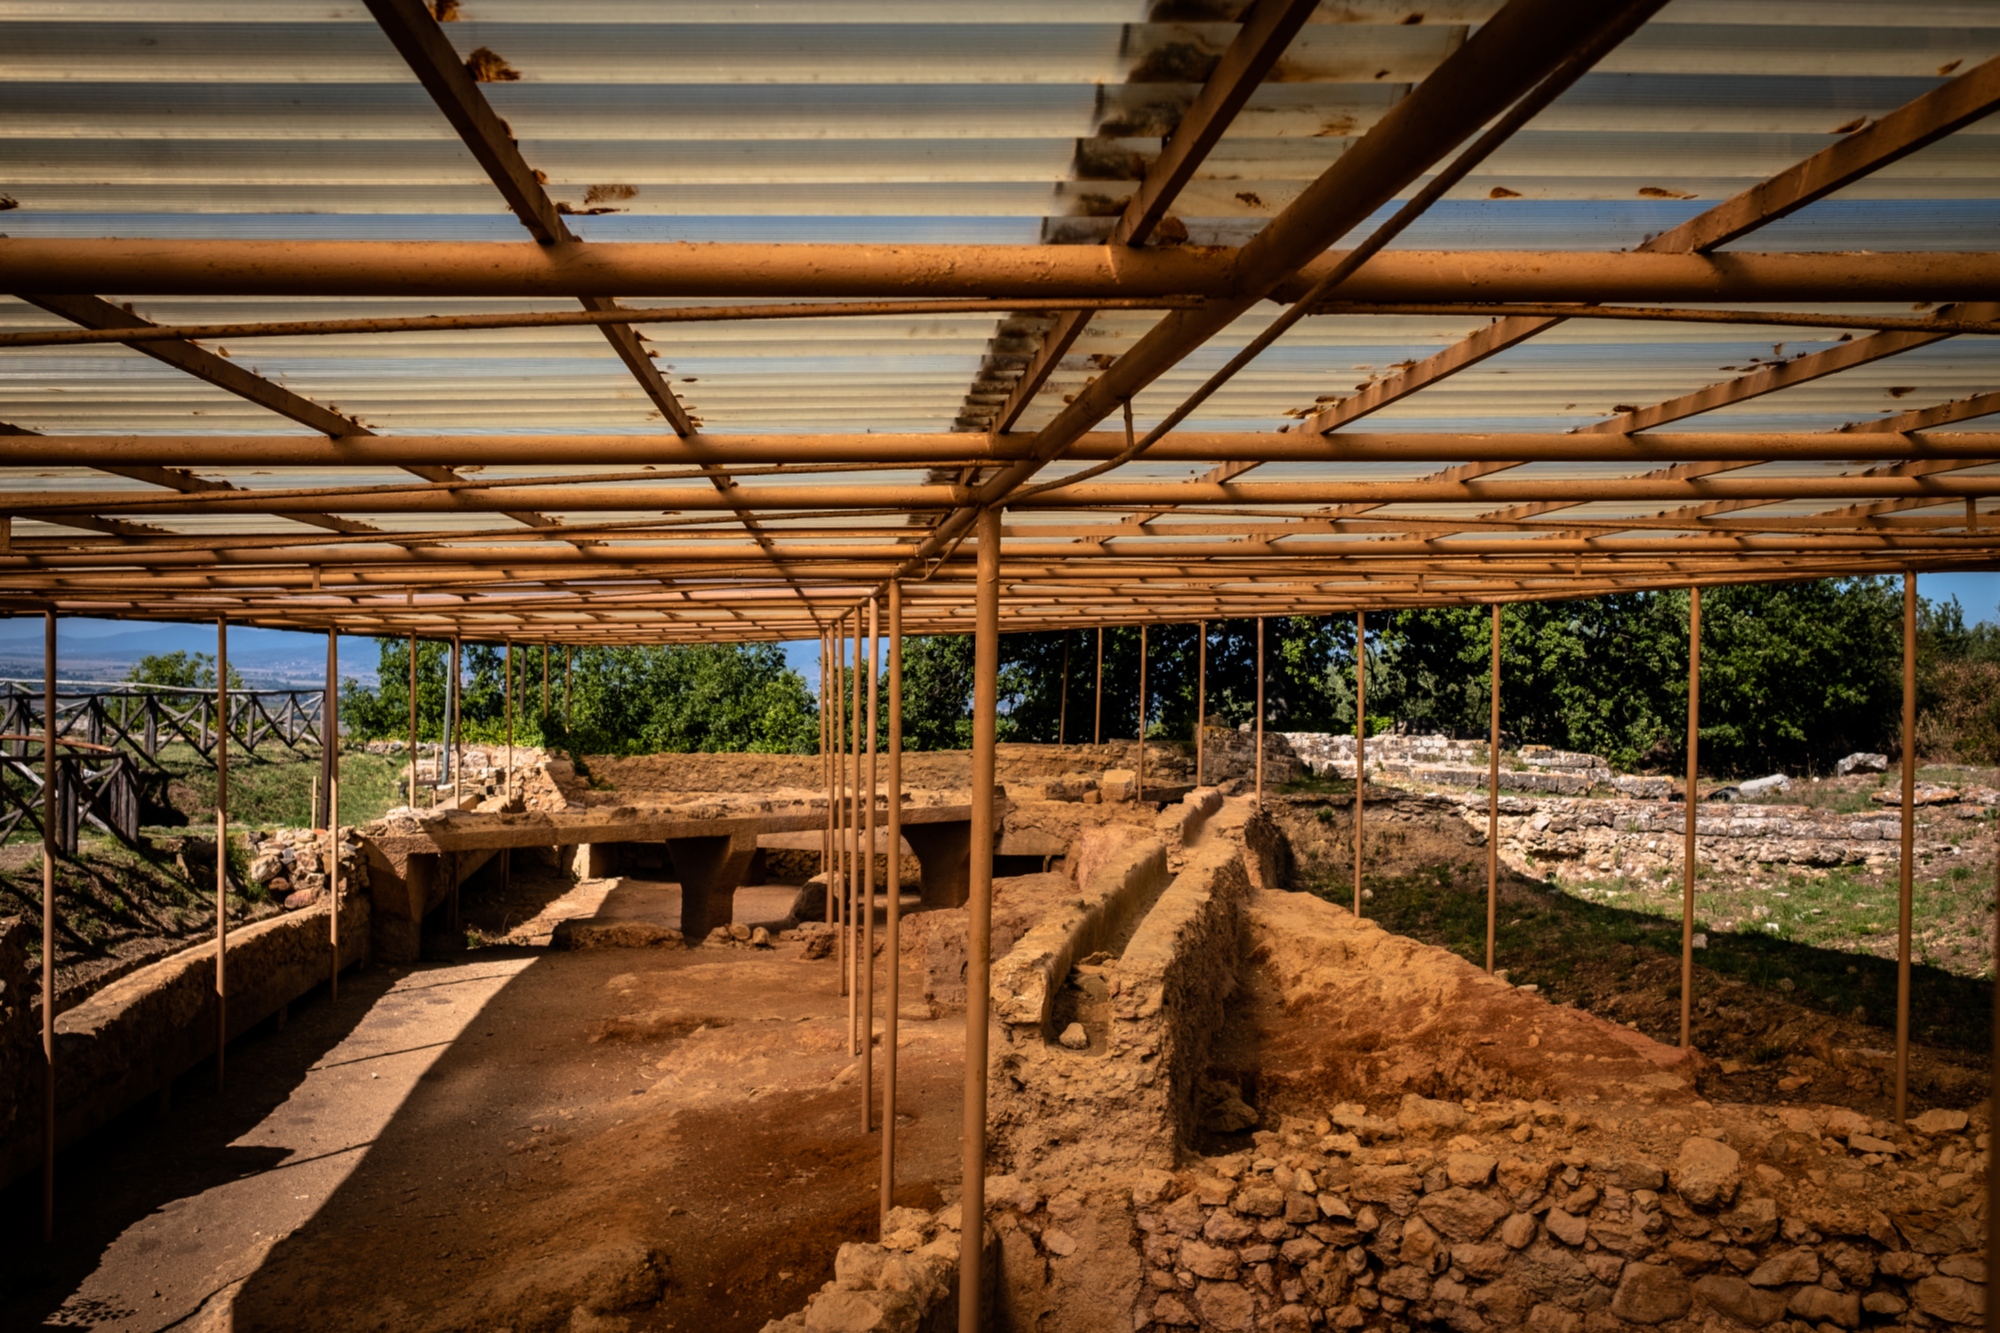 The Etruscan forum